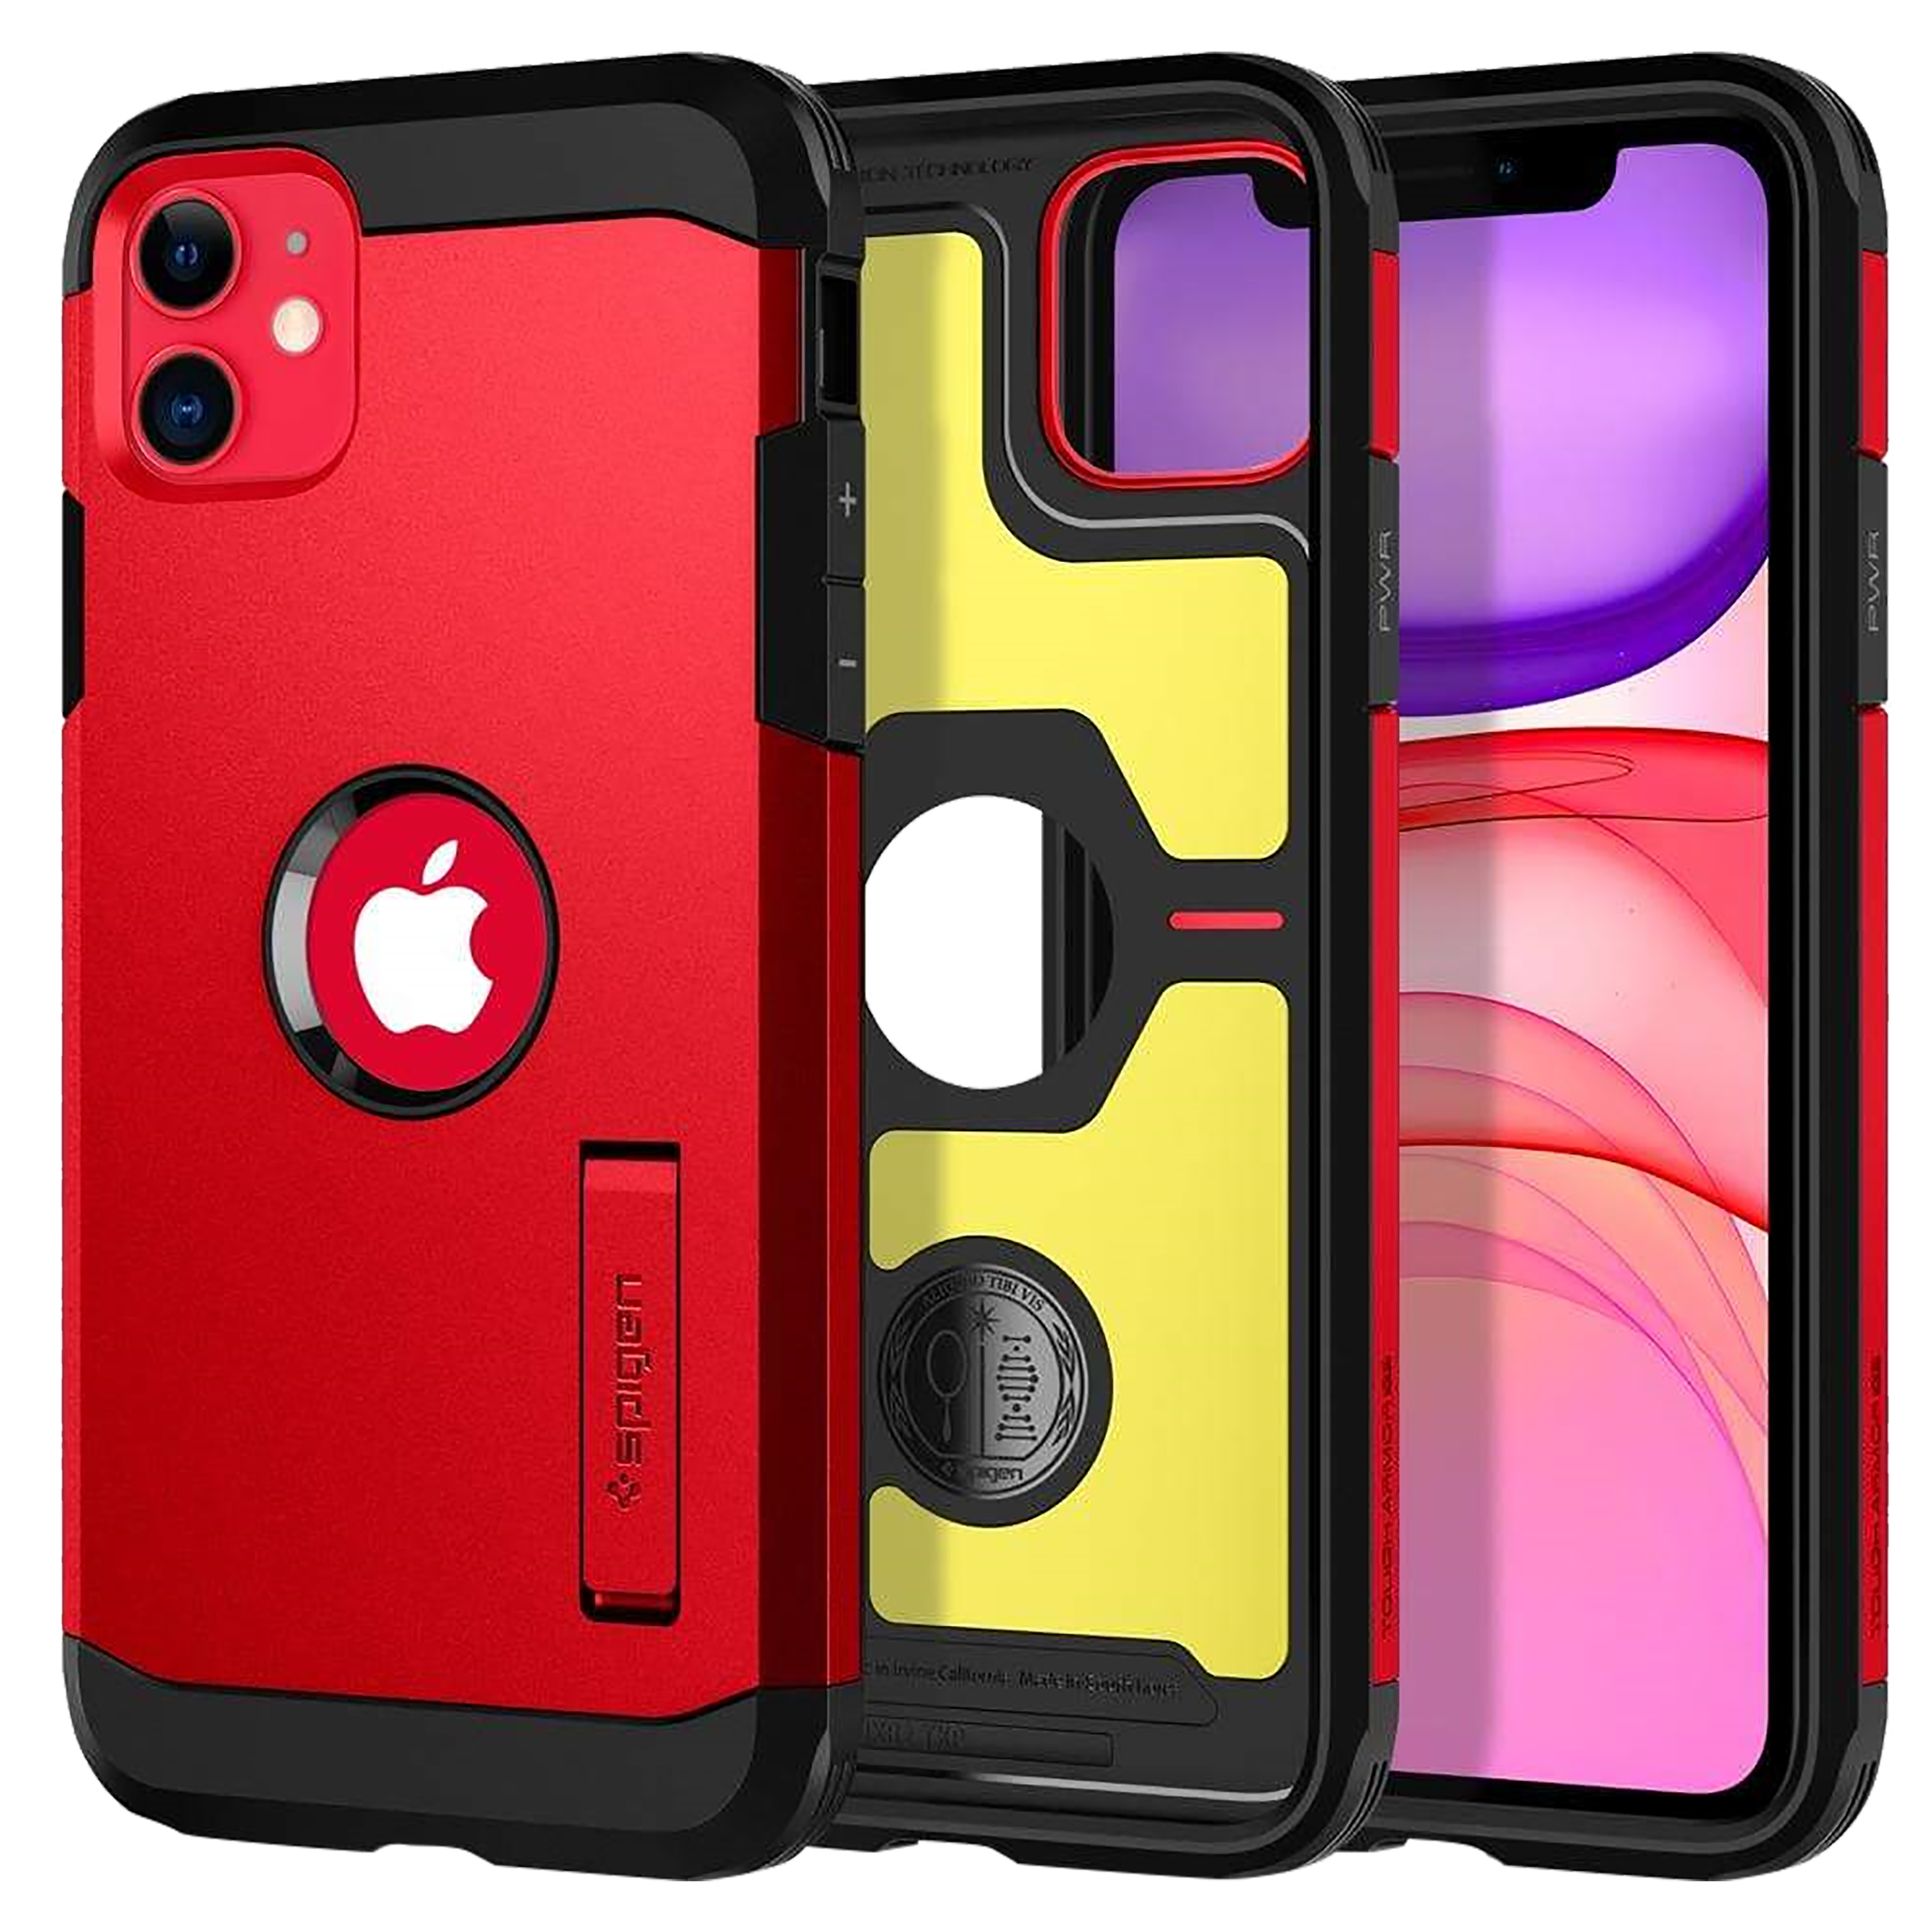 Buy Spigen Tough Armor TPU & PC Back Case For iPhone 11 (Air Cushion  Technology, ACS00408, Red) Online - Croma